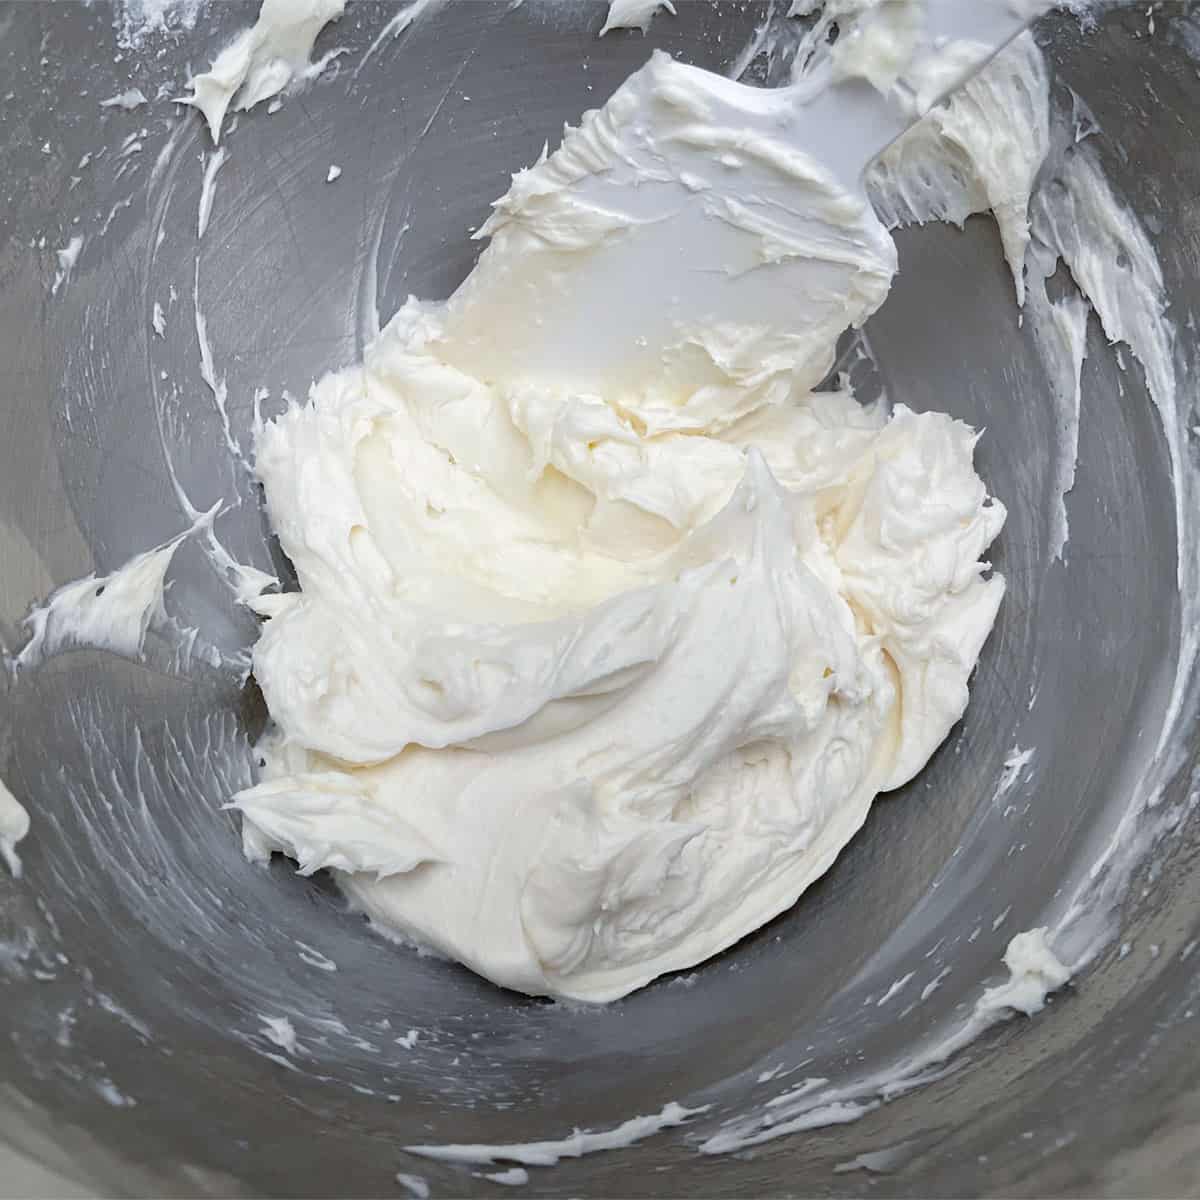 Coconut buttercream frosting in the mixer bowl just before adding the sweetened coconut.